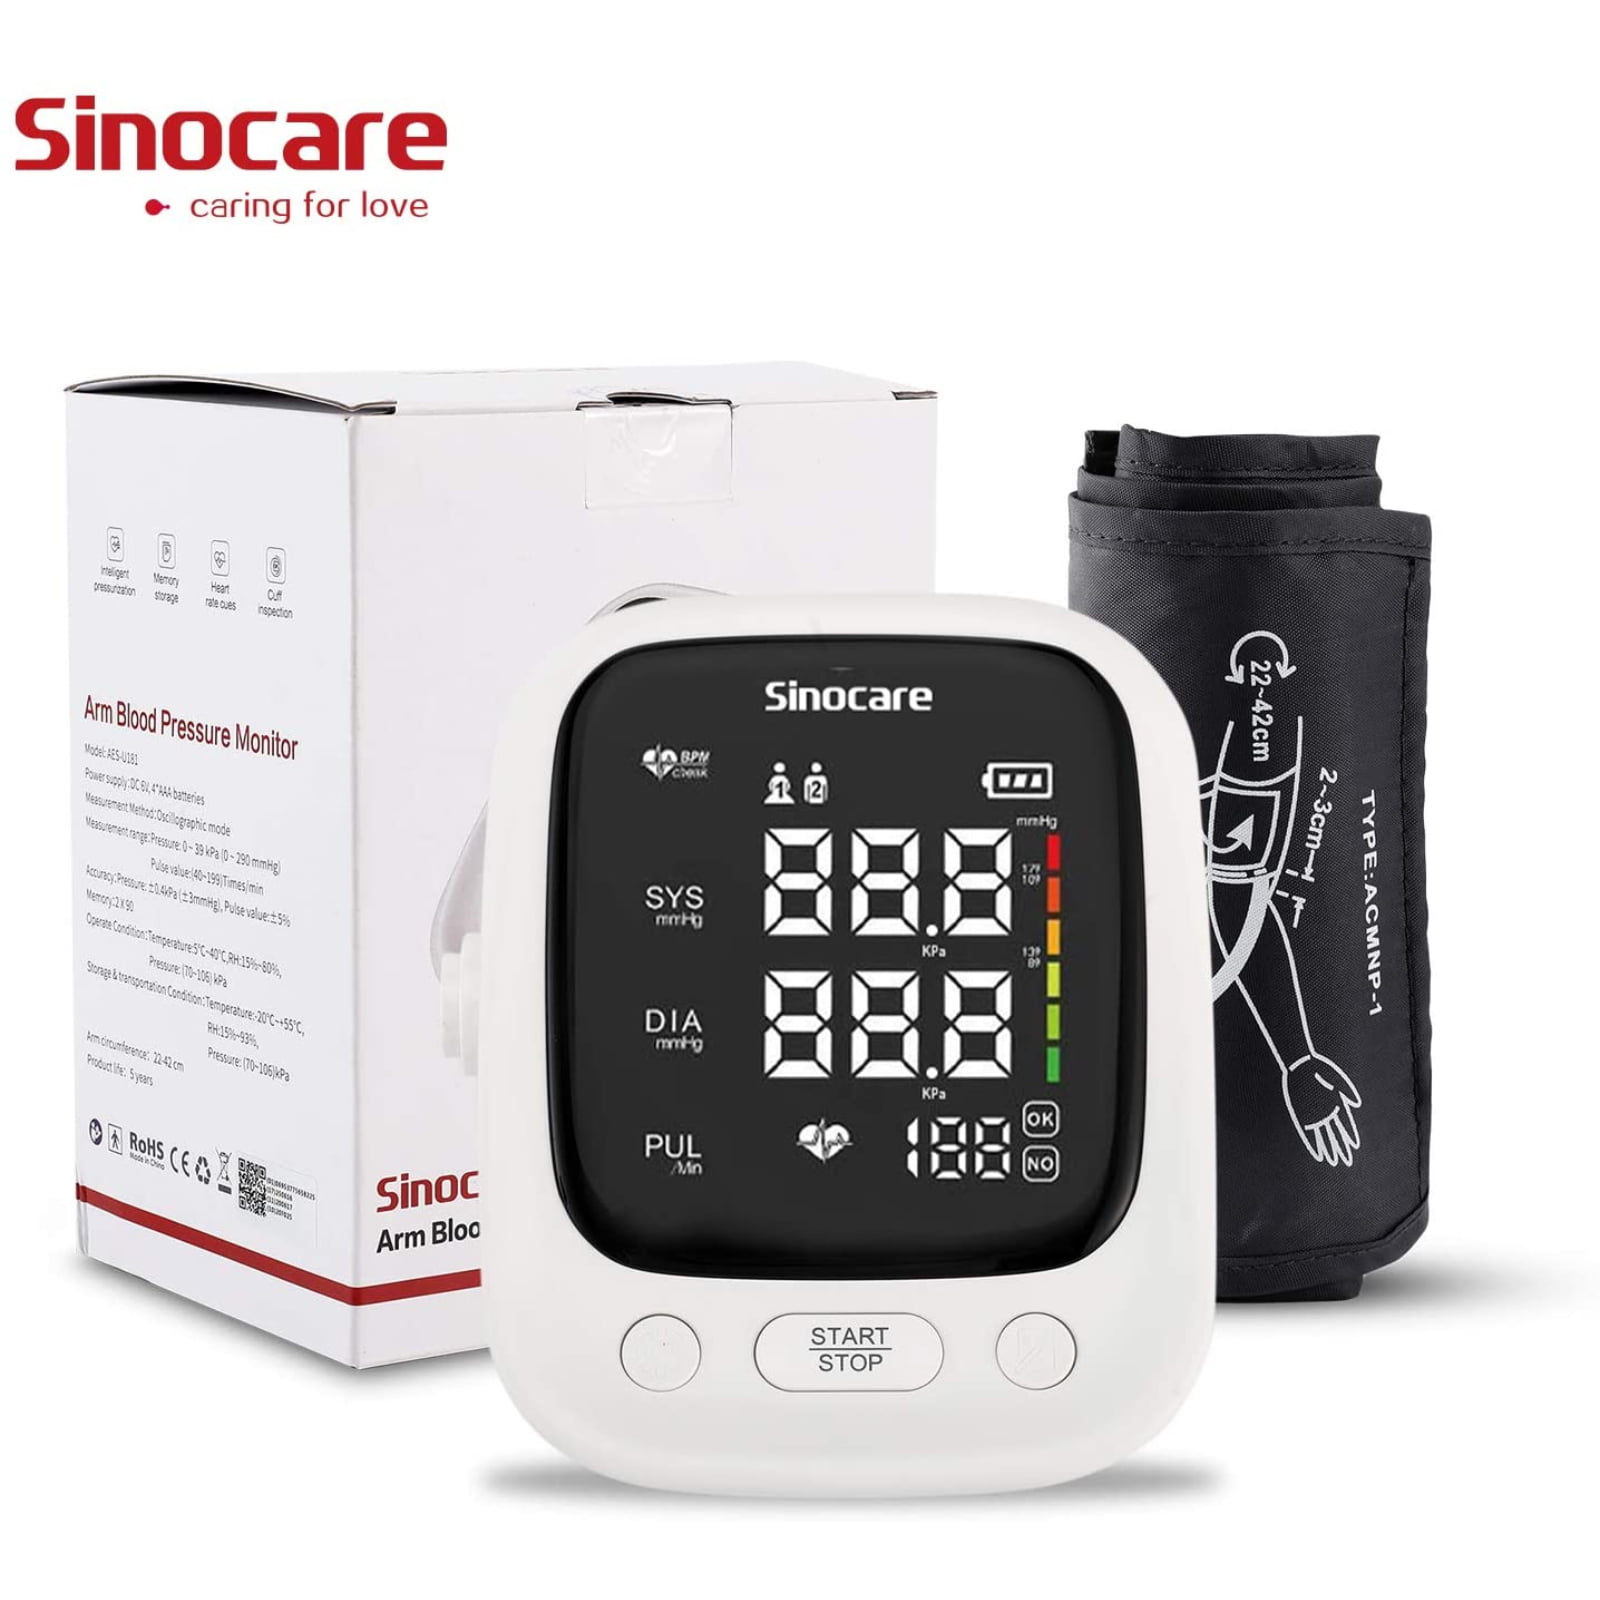 Sevacare By Monoprice Blood Pressure Monitor : Target